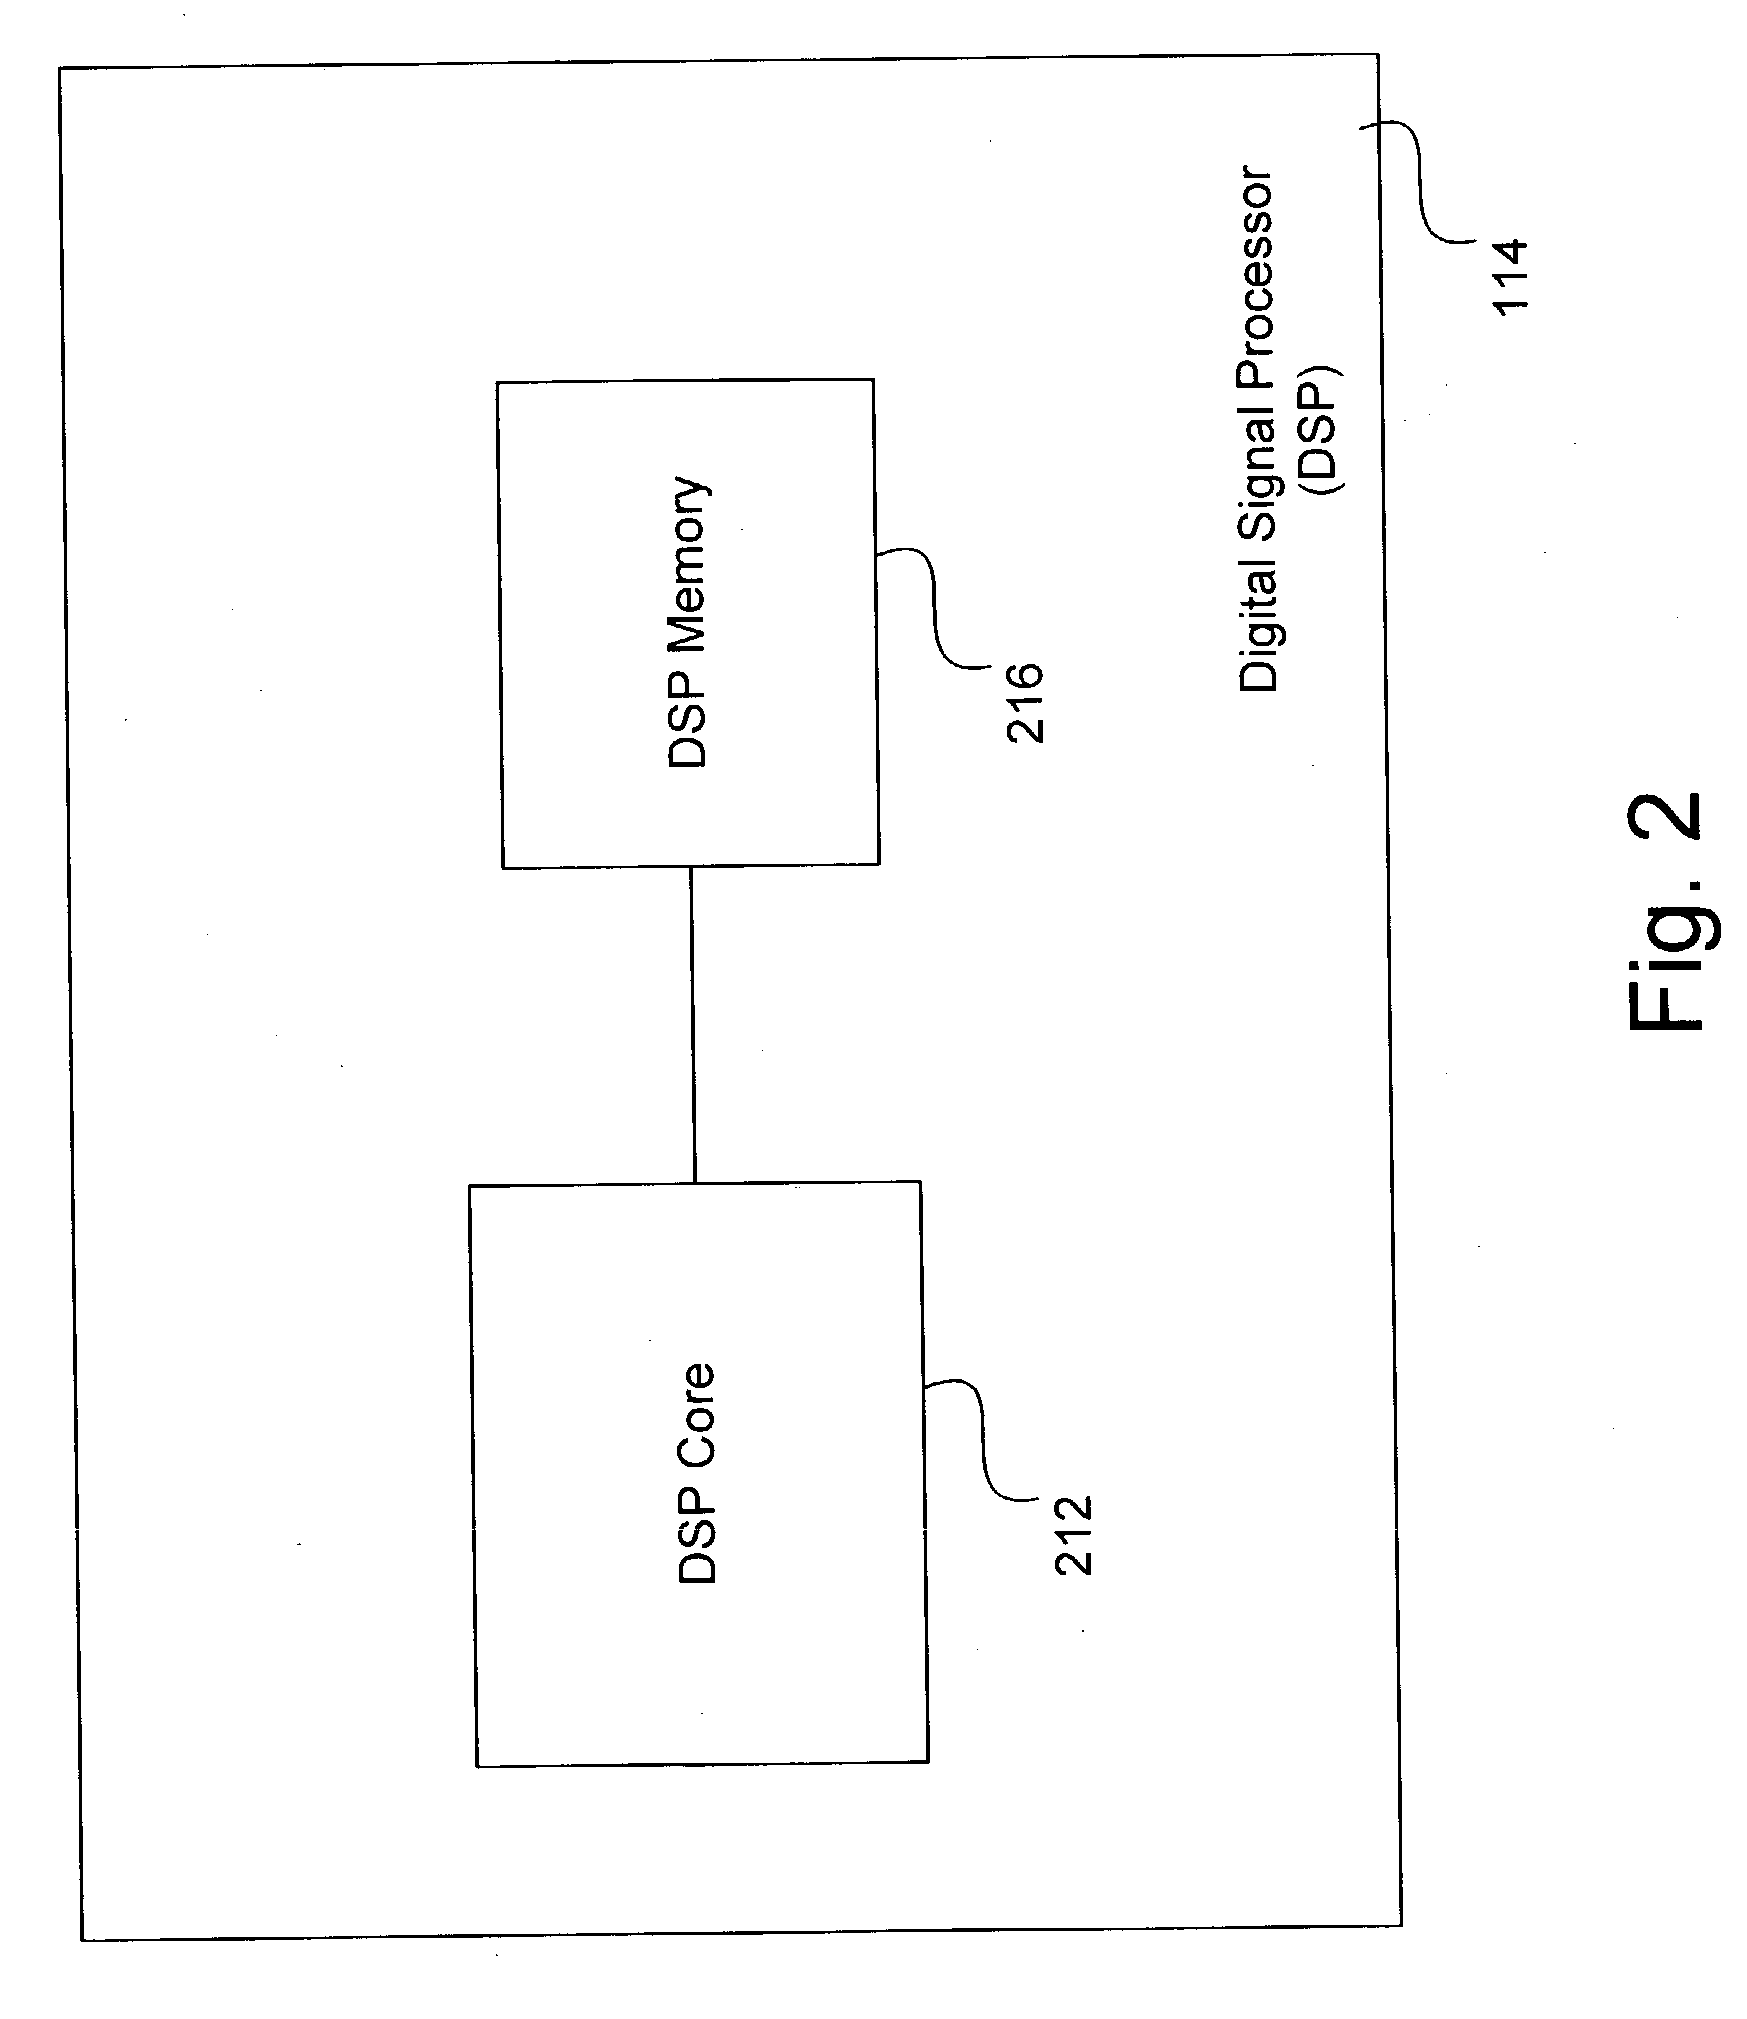 System and method for accurately calculating a mathematical power function in an electronic device